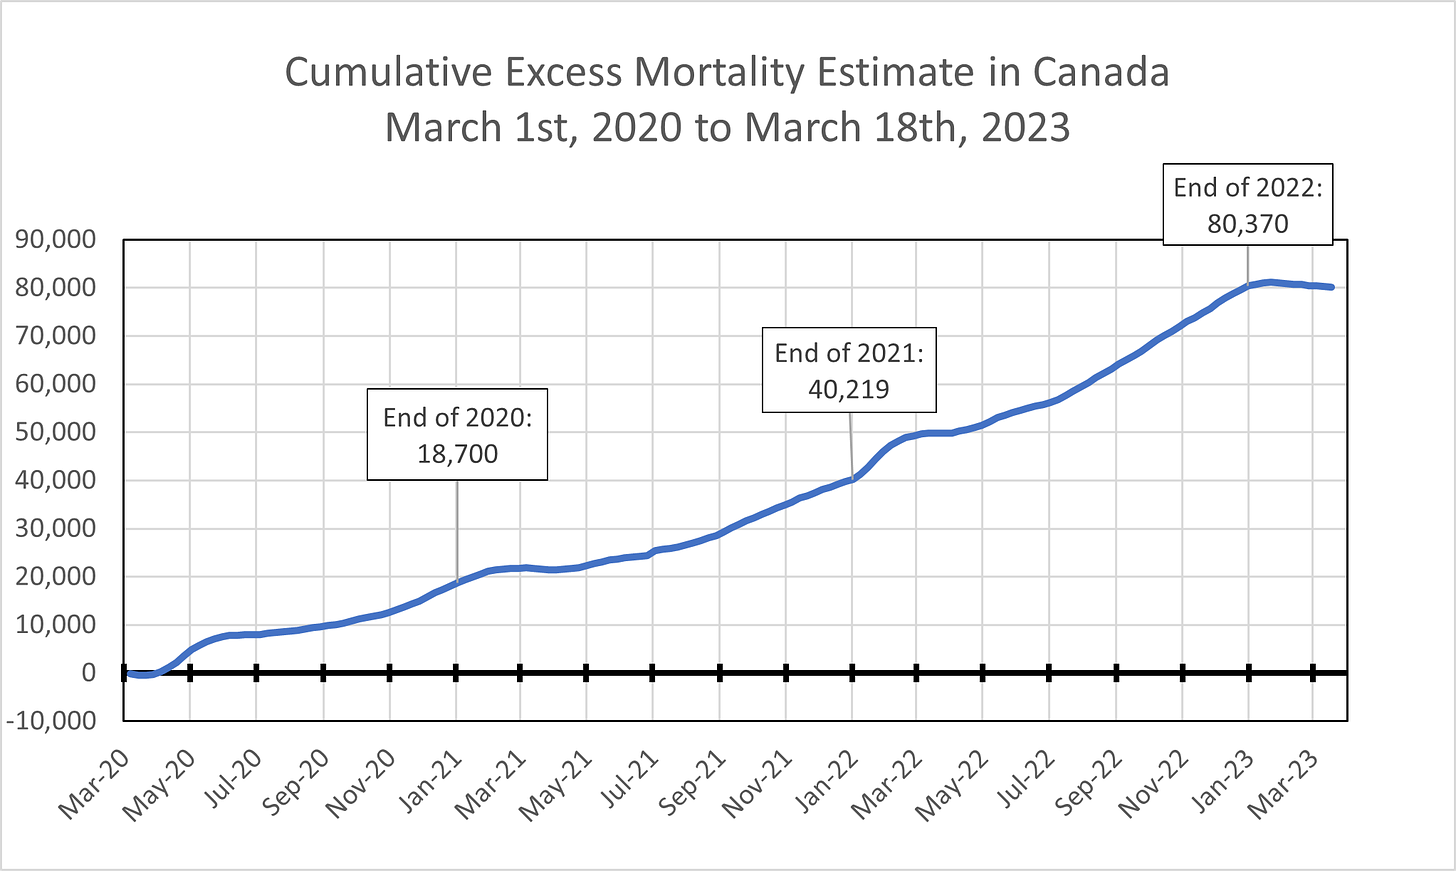 Chart showing cumulative excess mortality in Canada from March 1st, 2020 to March 18th, 2023, with figures at the end of each year indicated. The trend is a fairly straight line. There were 18,700 excess deaths by the end of 2020, 40,219 at the end of 2021, and 80,370 at the end of 2022.